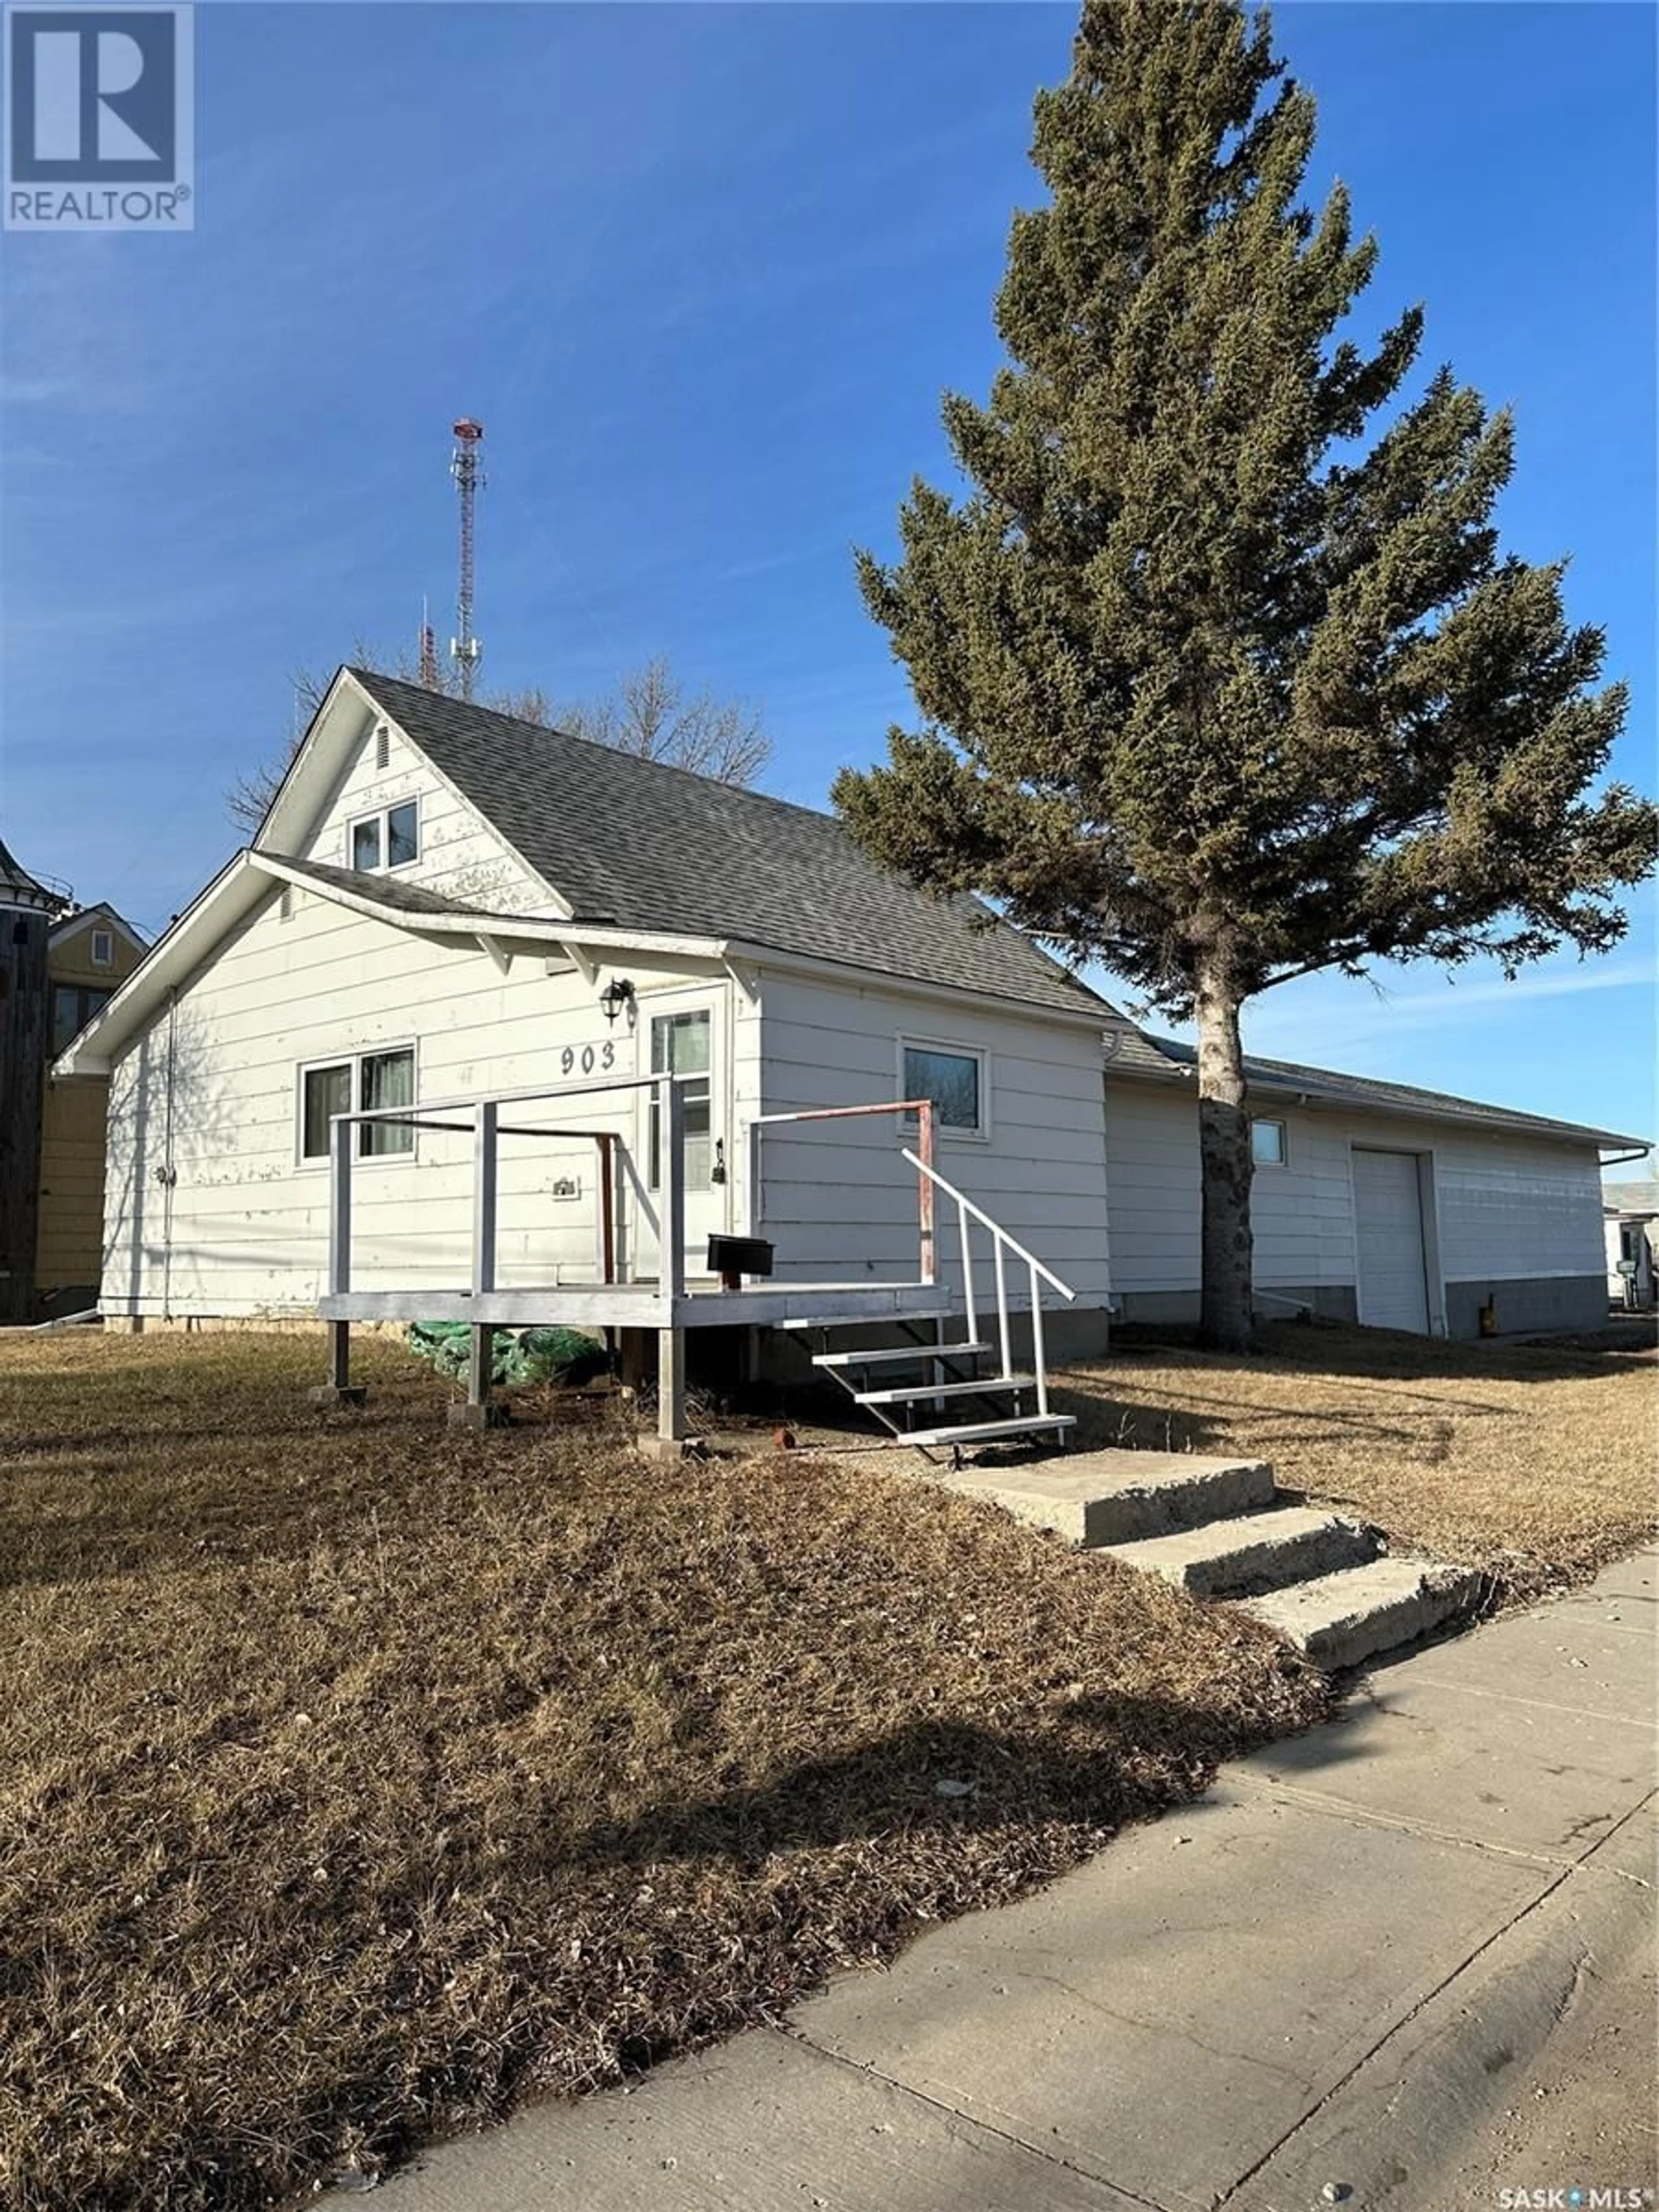 A pic from exterior of the house or condo for 903 4th STREET S, Weyburn Saskatchewan S4H2G6